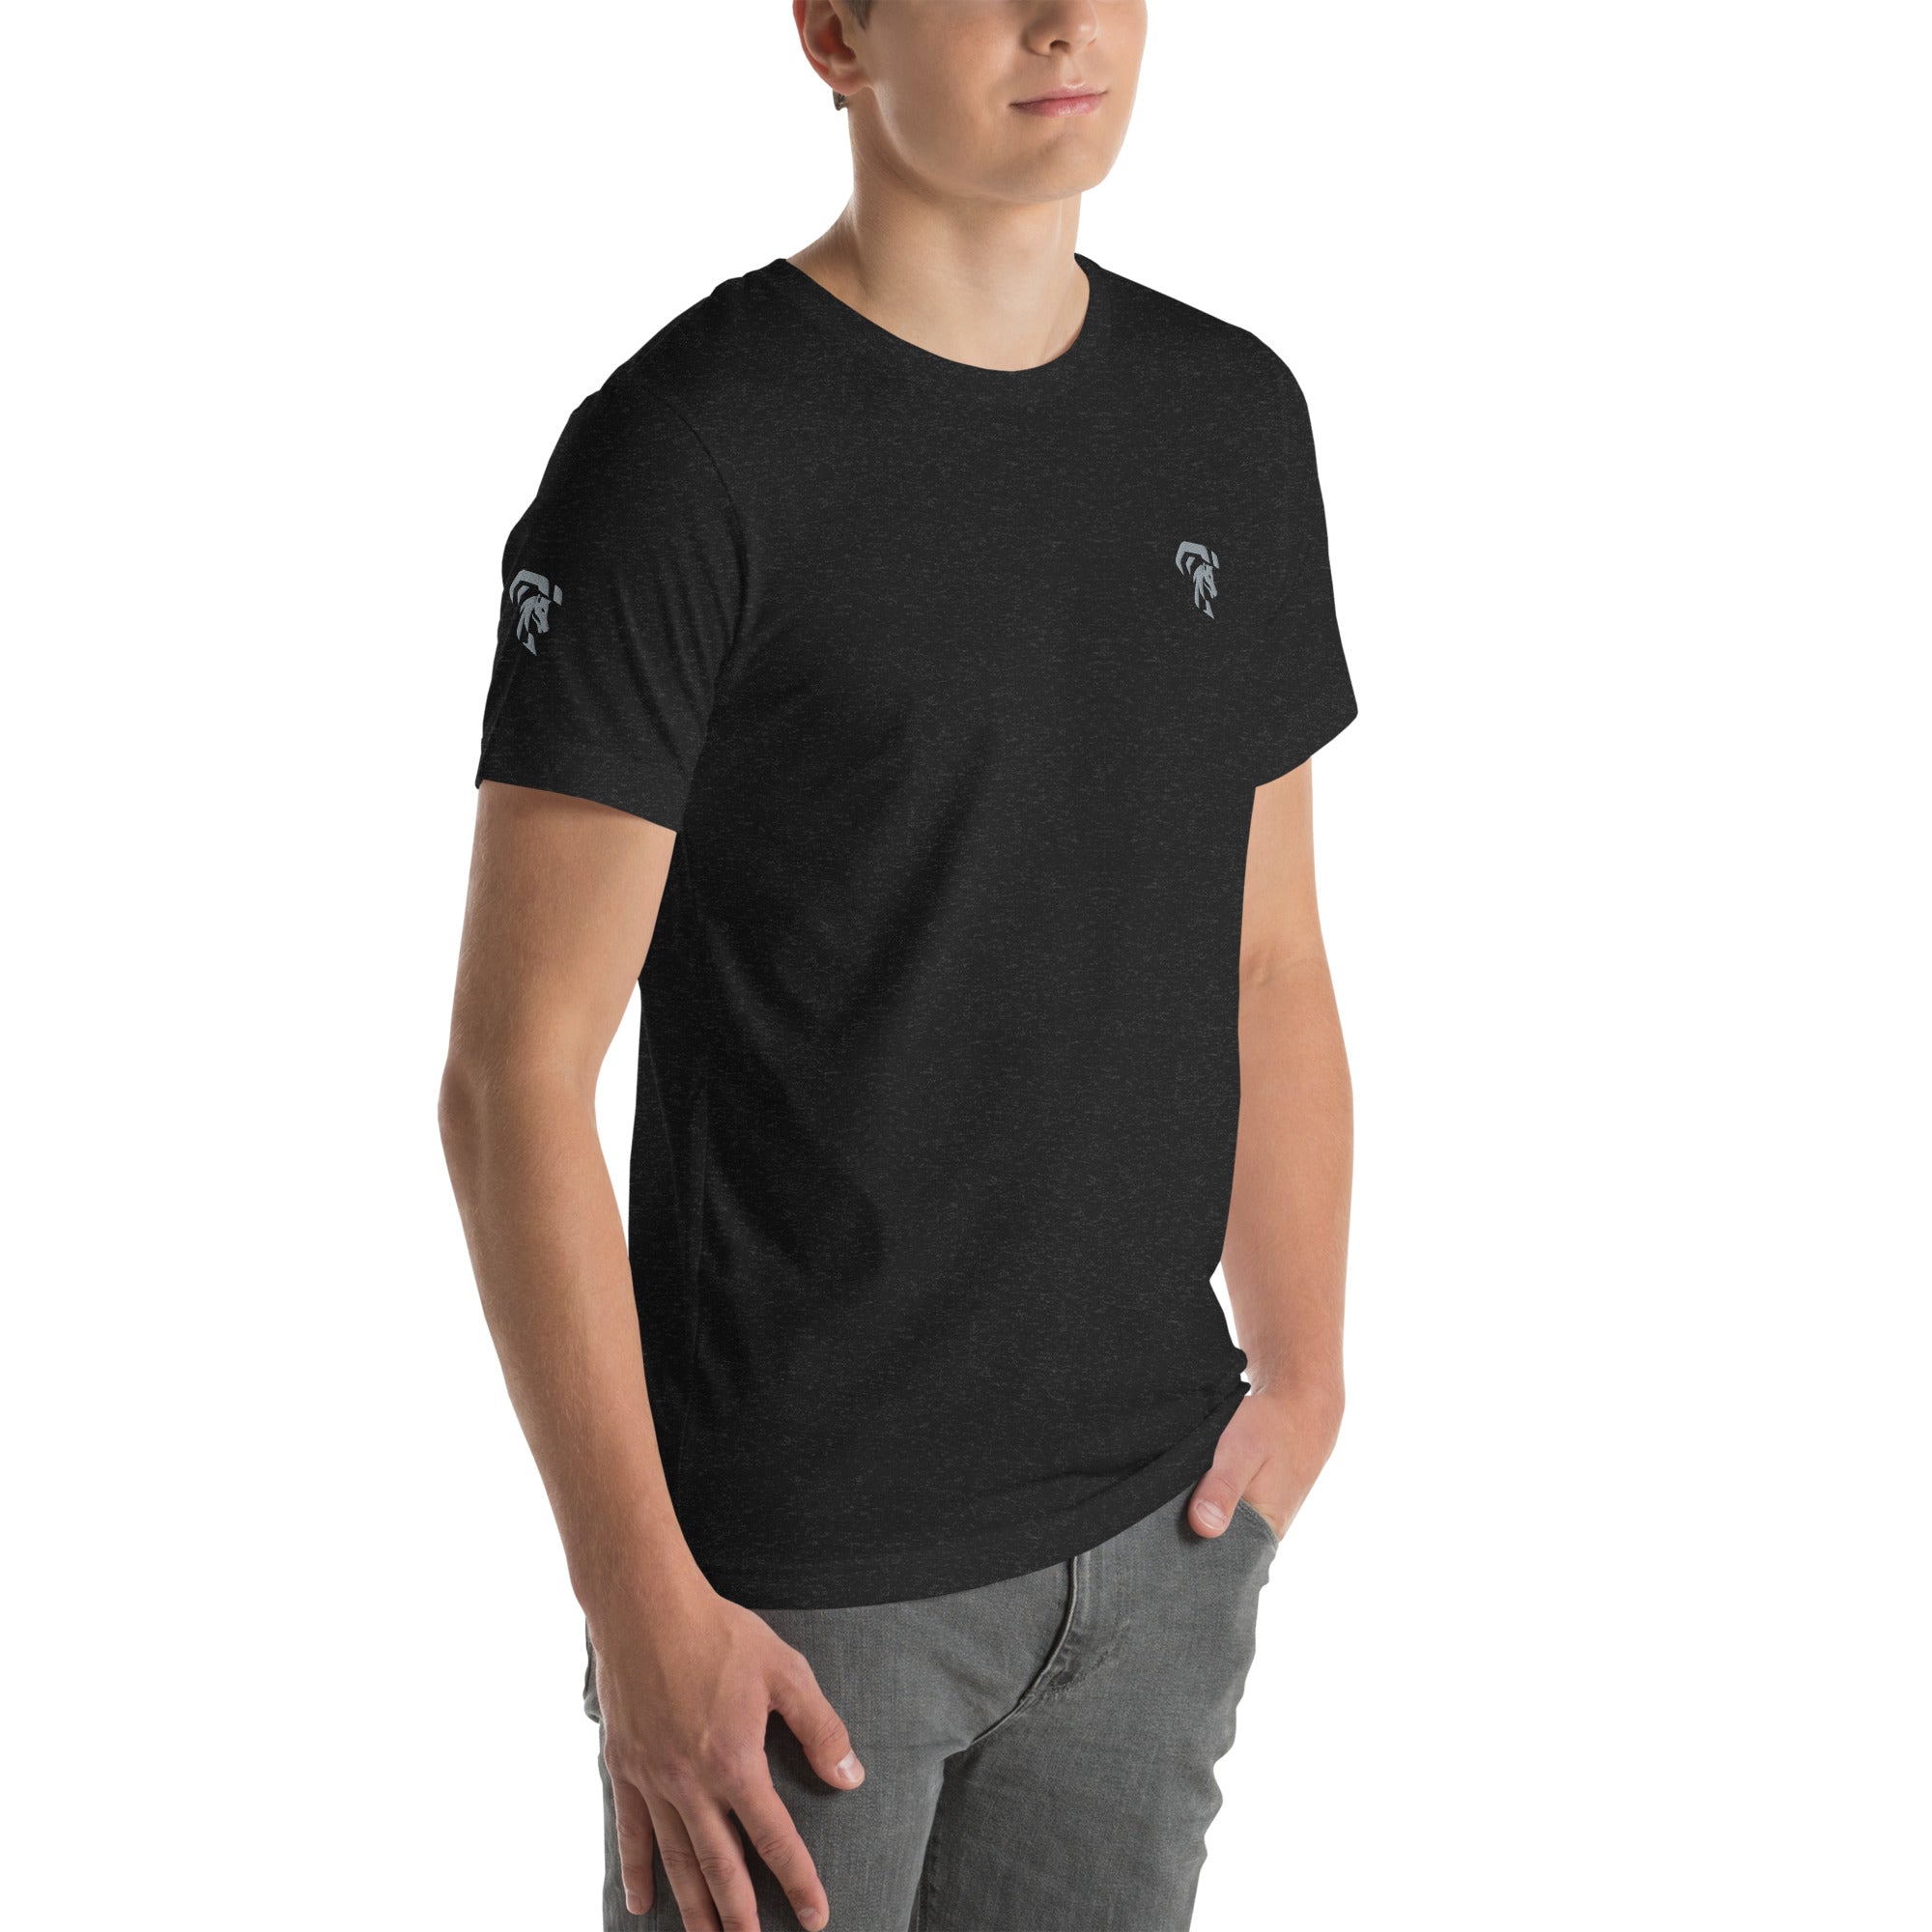 Unisex Filly Style Staple T-Shirt: Comfort and Versatility Combined